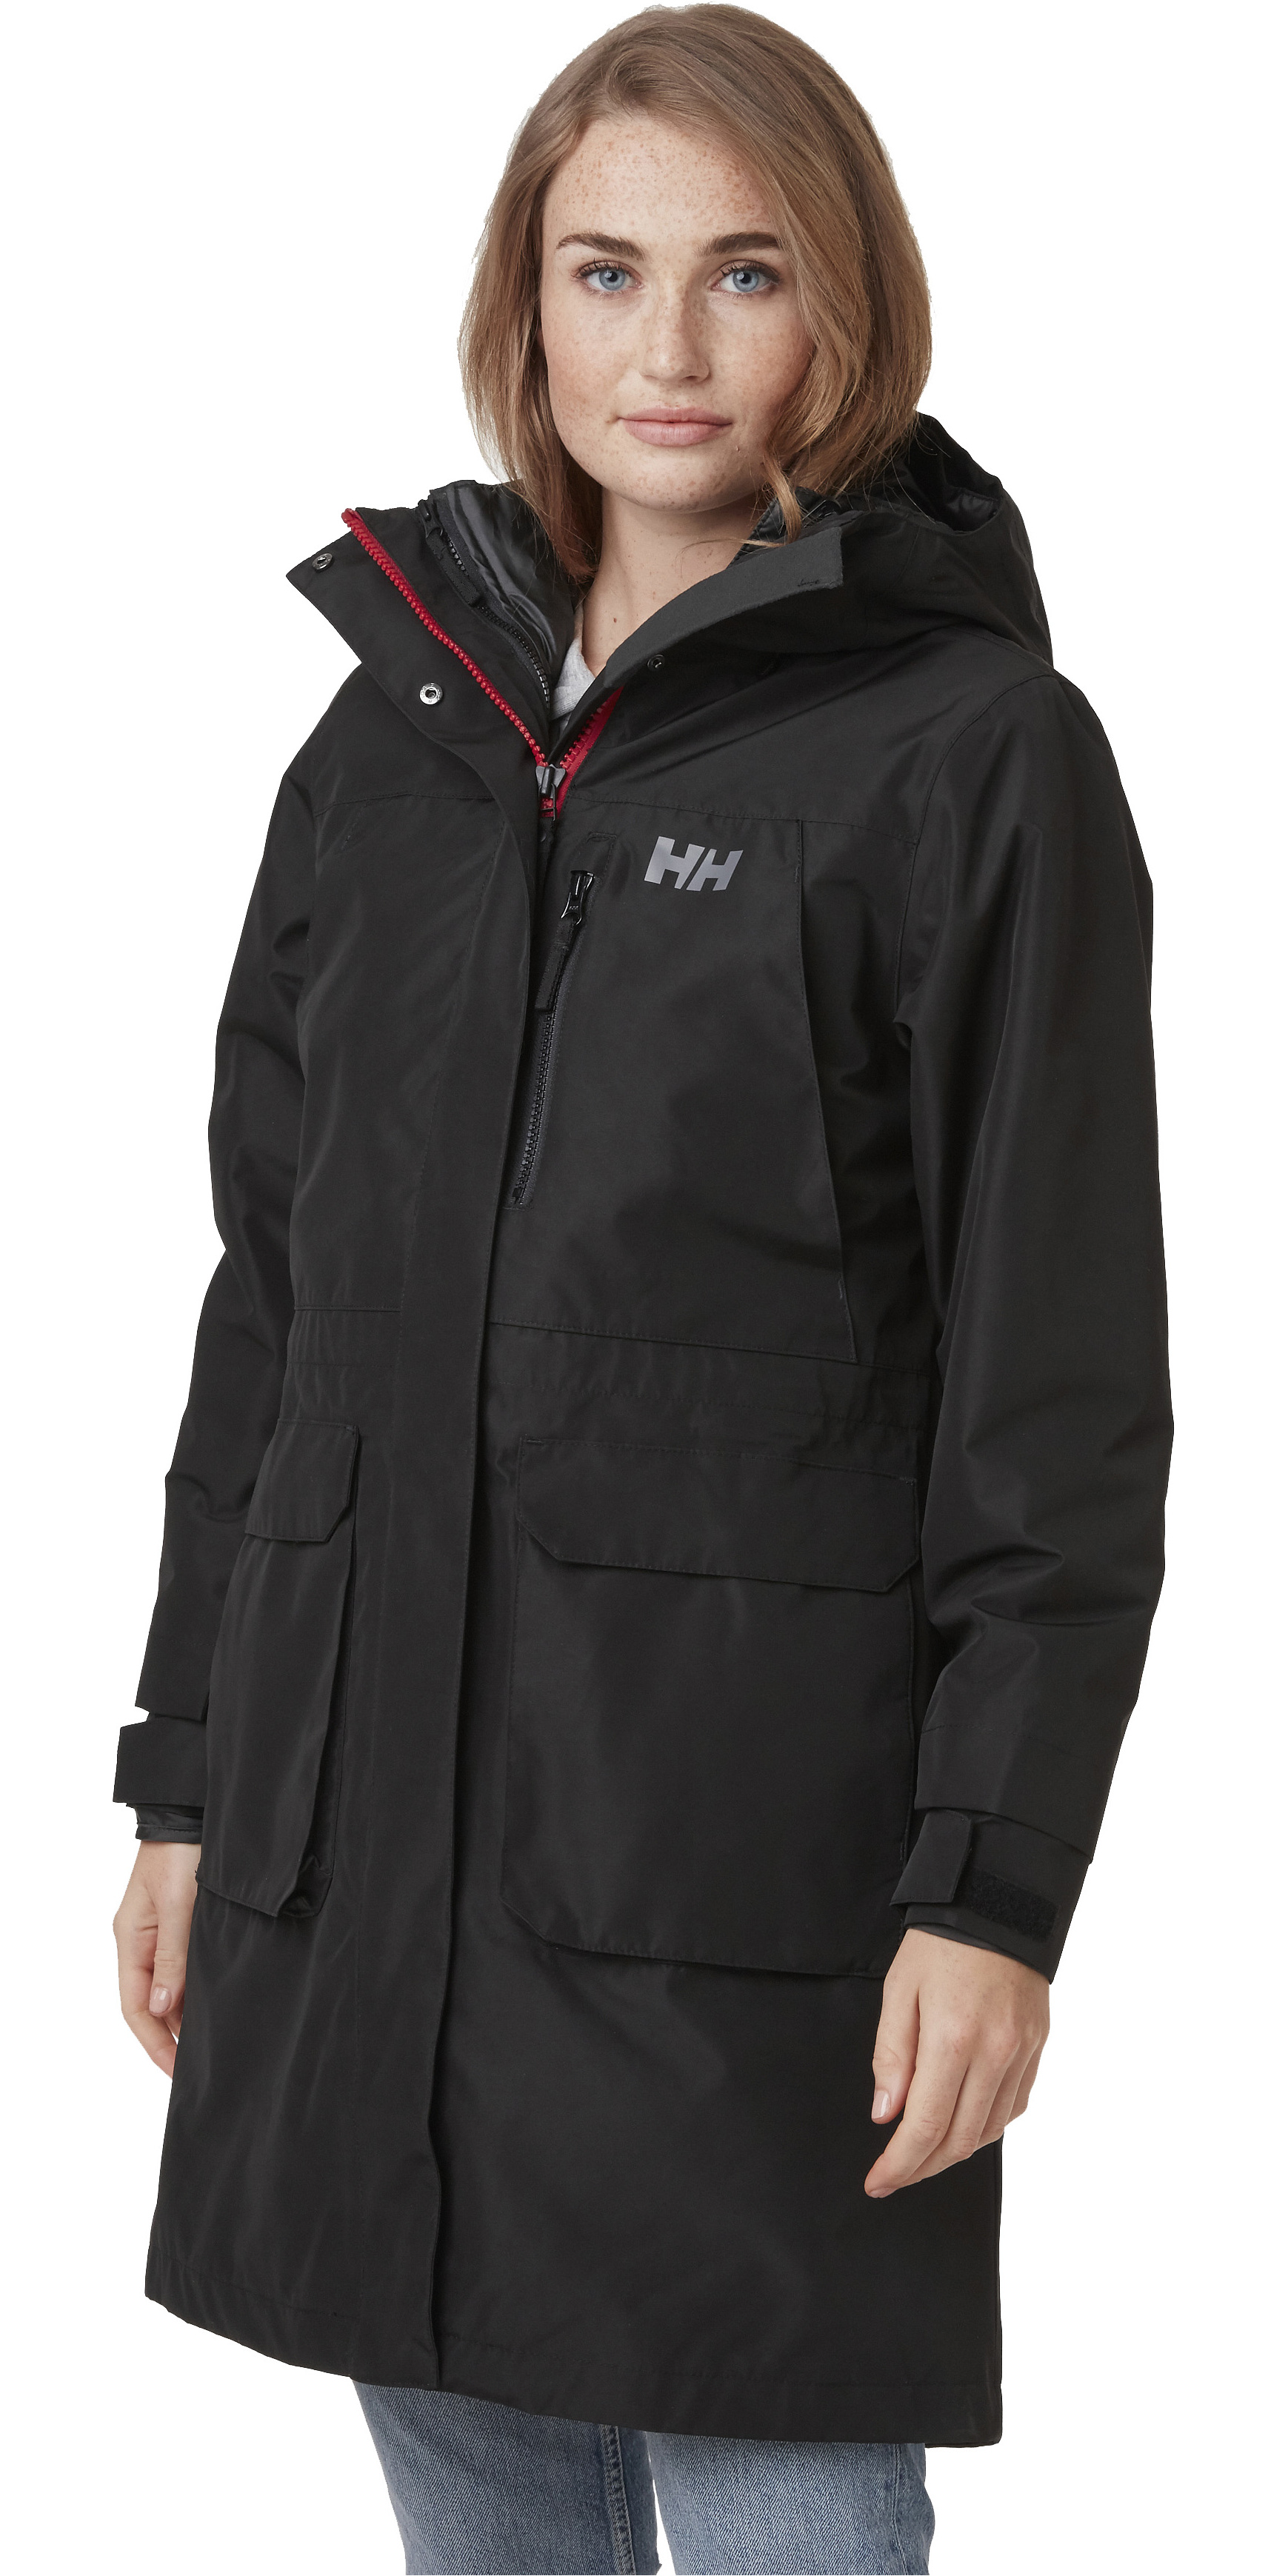 Willen Piraat Dwaal 2021 Helly Hansen Womens Rigging Coat 53512 - Black - Sailing - Sailing -  Yacht | Watersports Outlet